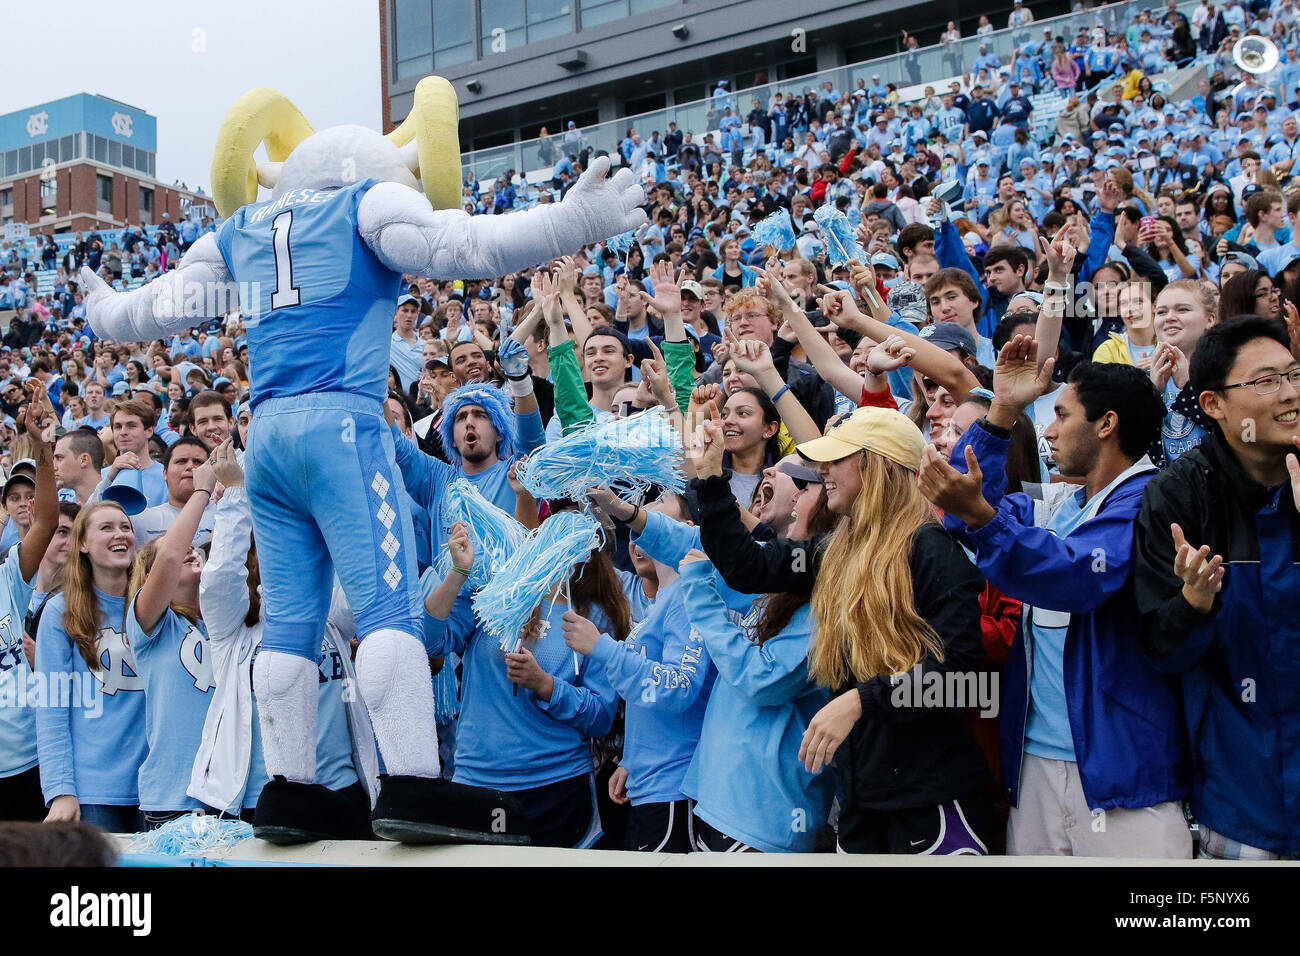 Chapel-Hill, NC, USA. 7th Nov, 2015. Ramses pumps up the students after the victory in the NCAA Football match-up between the Duke Blue Devils and the North Carolina Tar Heels at Kenan Memorial Stadium in Chapel-Hill, NC. Scott Kinser/CSM/Alamy Live News Stock Photo